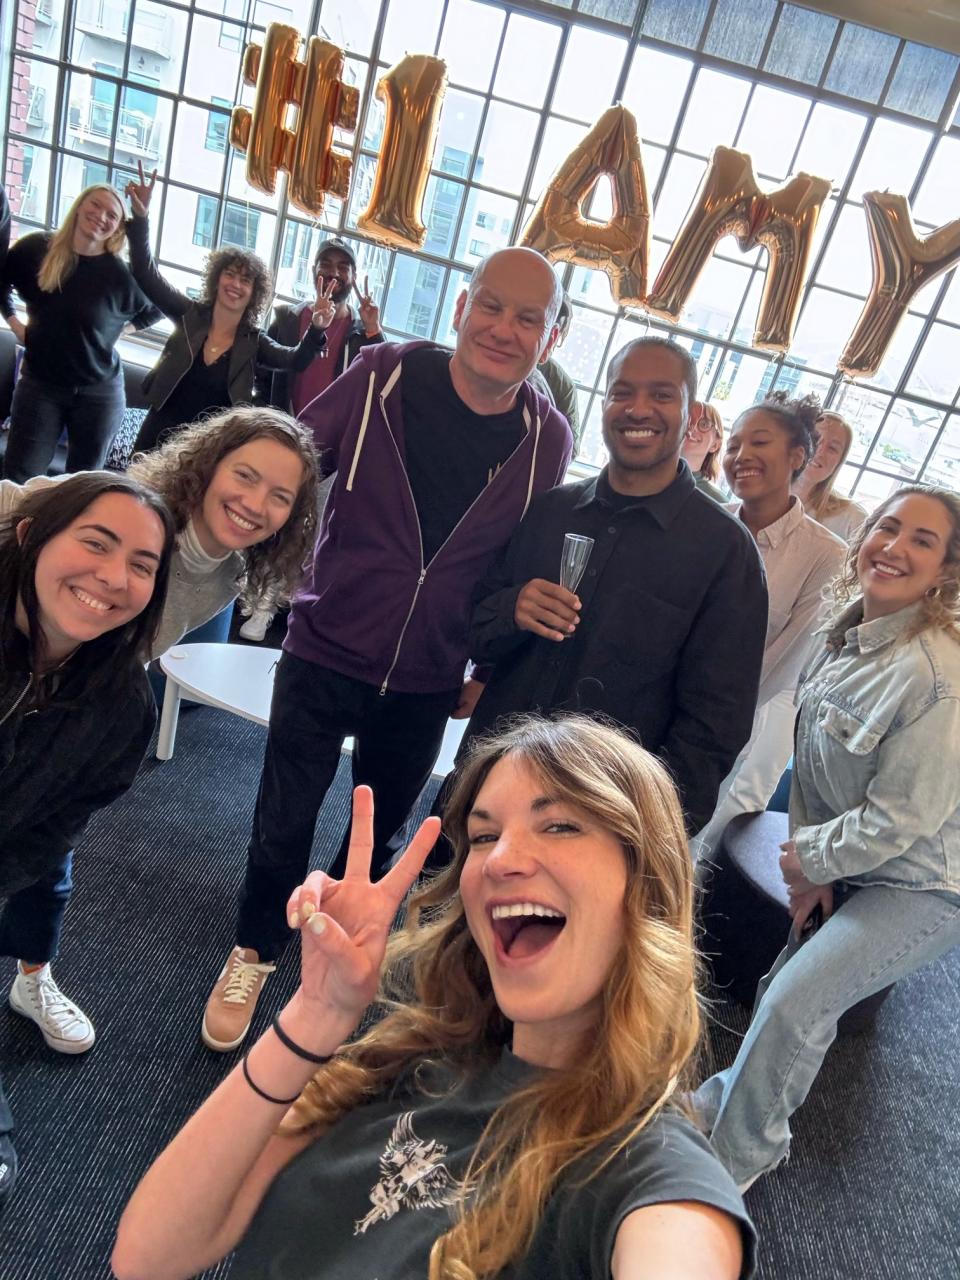 Allen celebrating her 2024 hit singles at Warner Chappell Music’s officers in Los Angeles earlier this year, with (from left) manager/A&R Gabz Landman, co-chairs Carianne Marshall and Guy Moot, president Ryan Press and other staffers. (Photo courtesy Amy Allen)